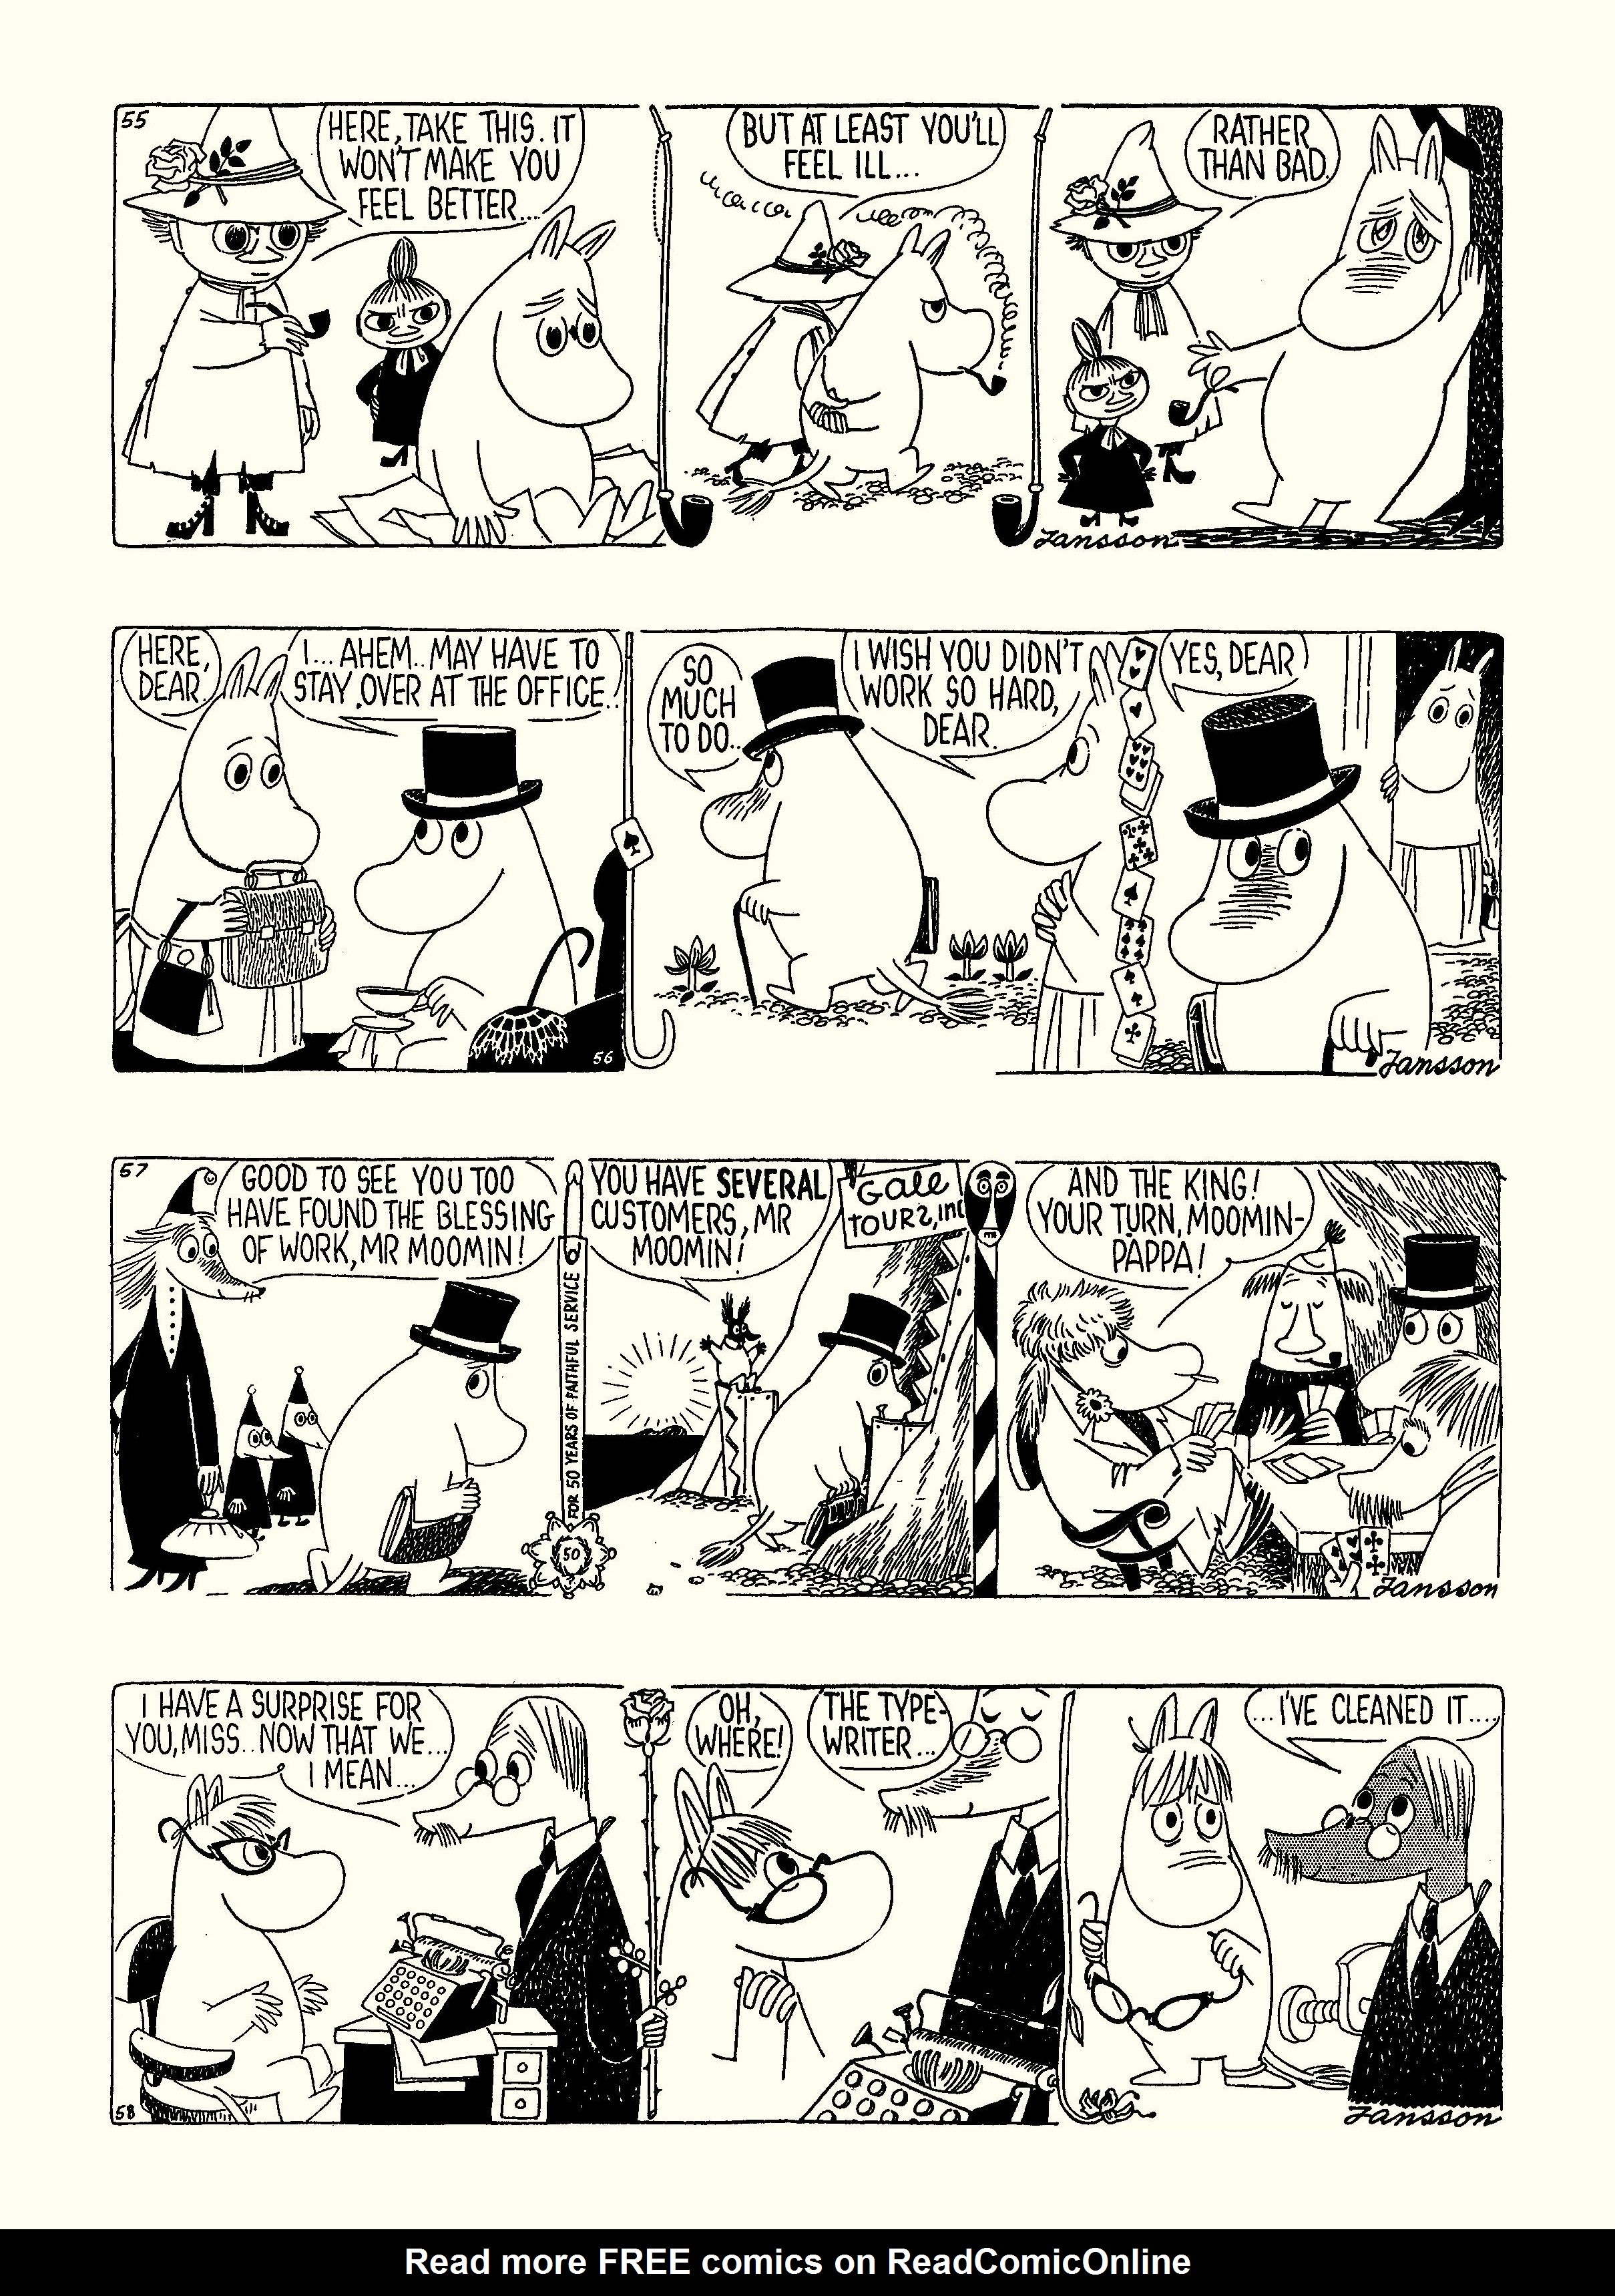 Read online Moomin: The Complete Tove Jansson Comic Strip comic -  Issue # TPB 4 - 51